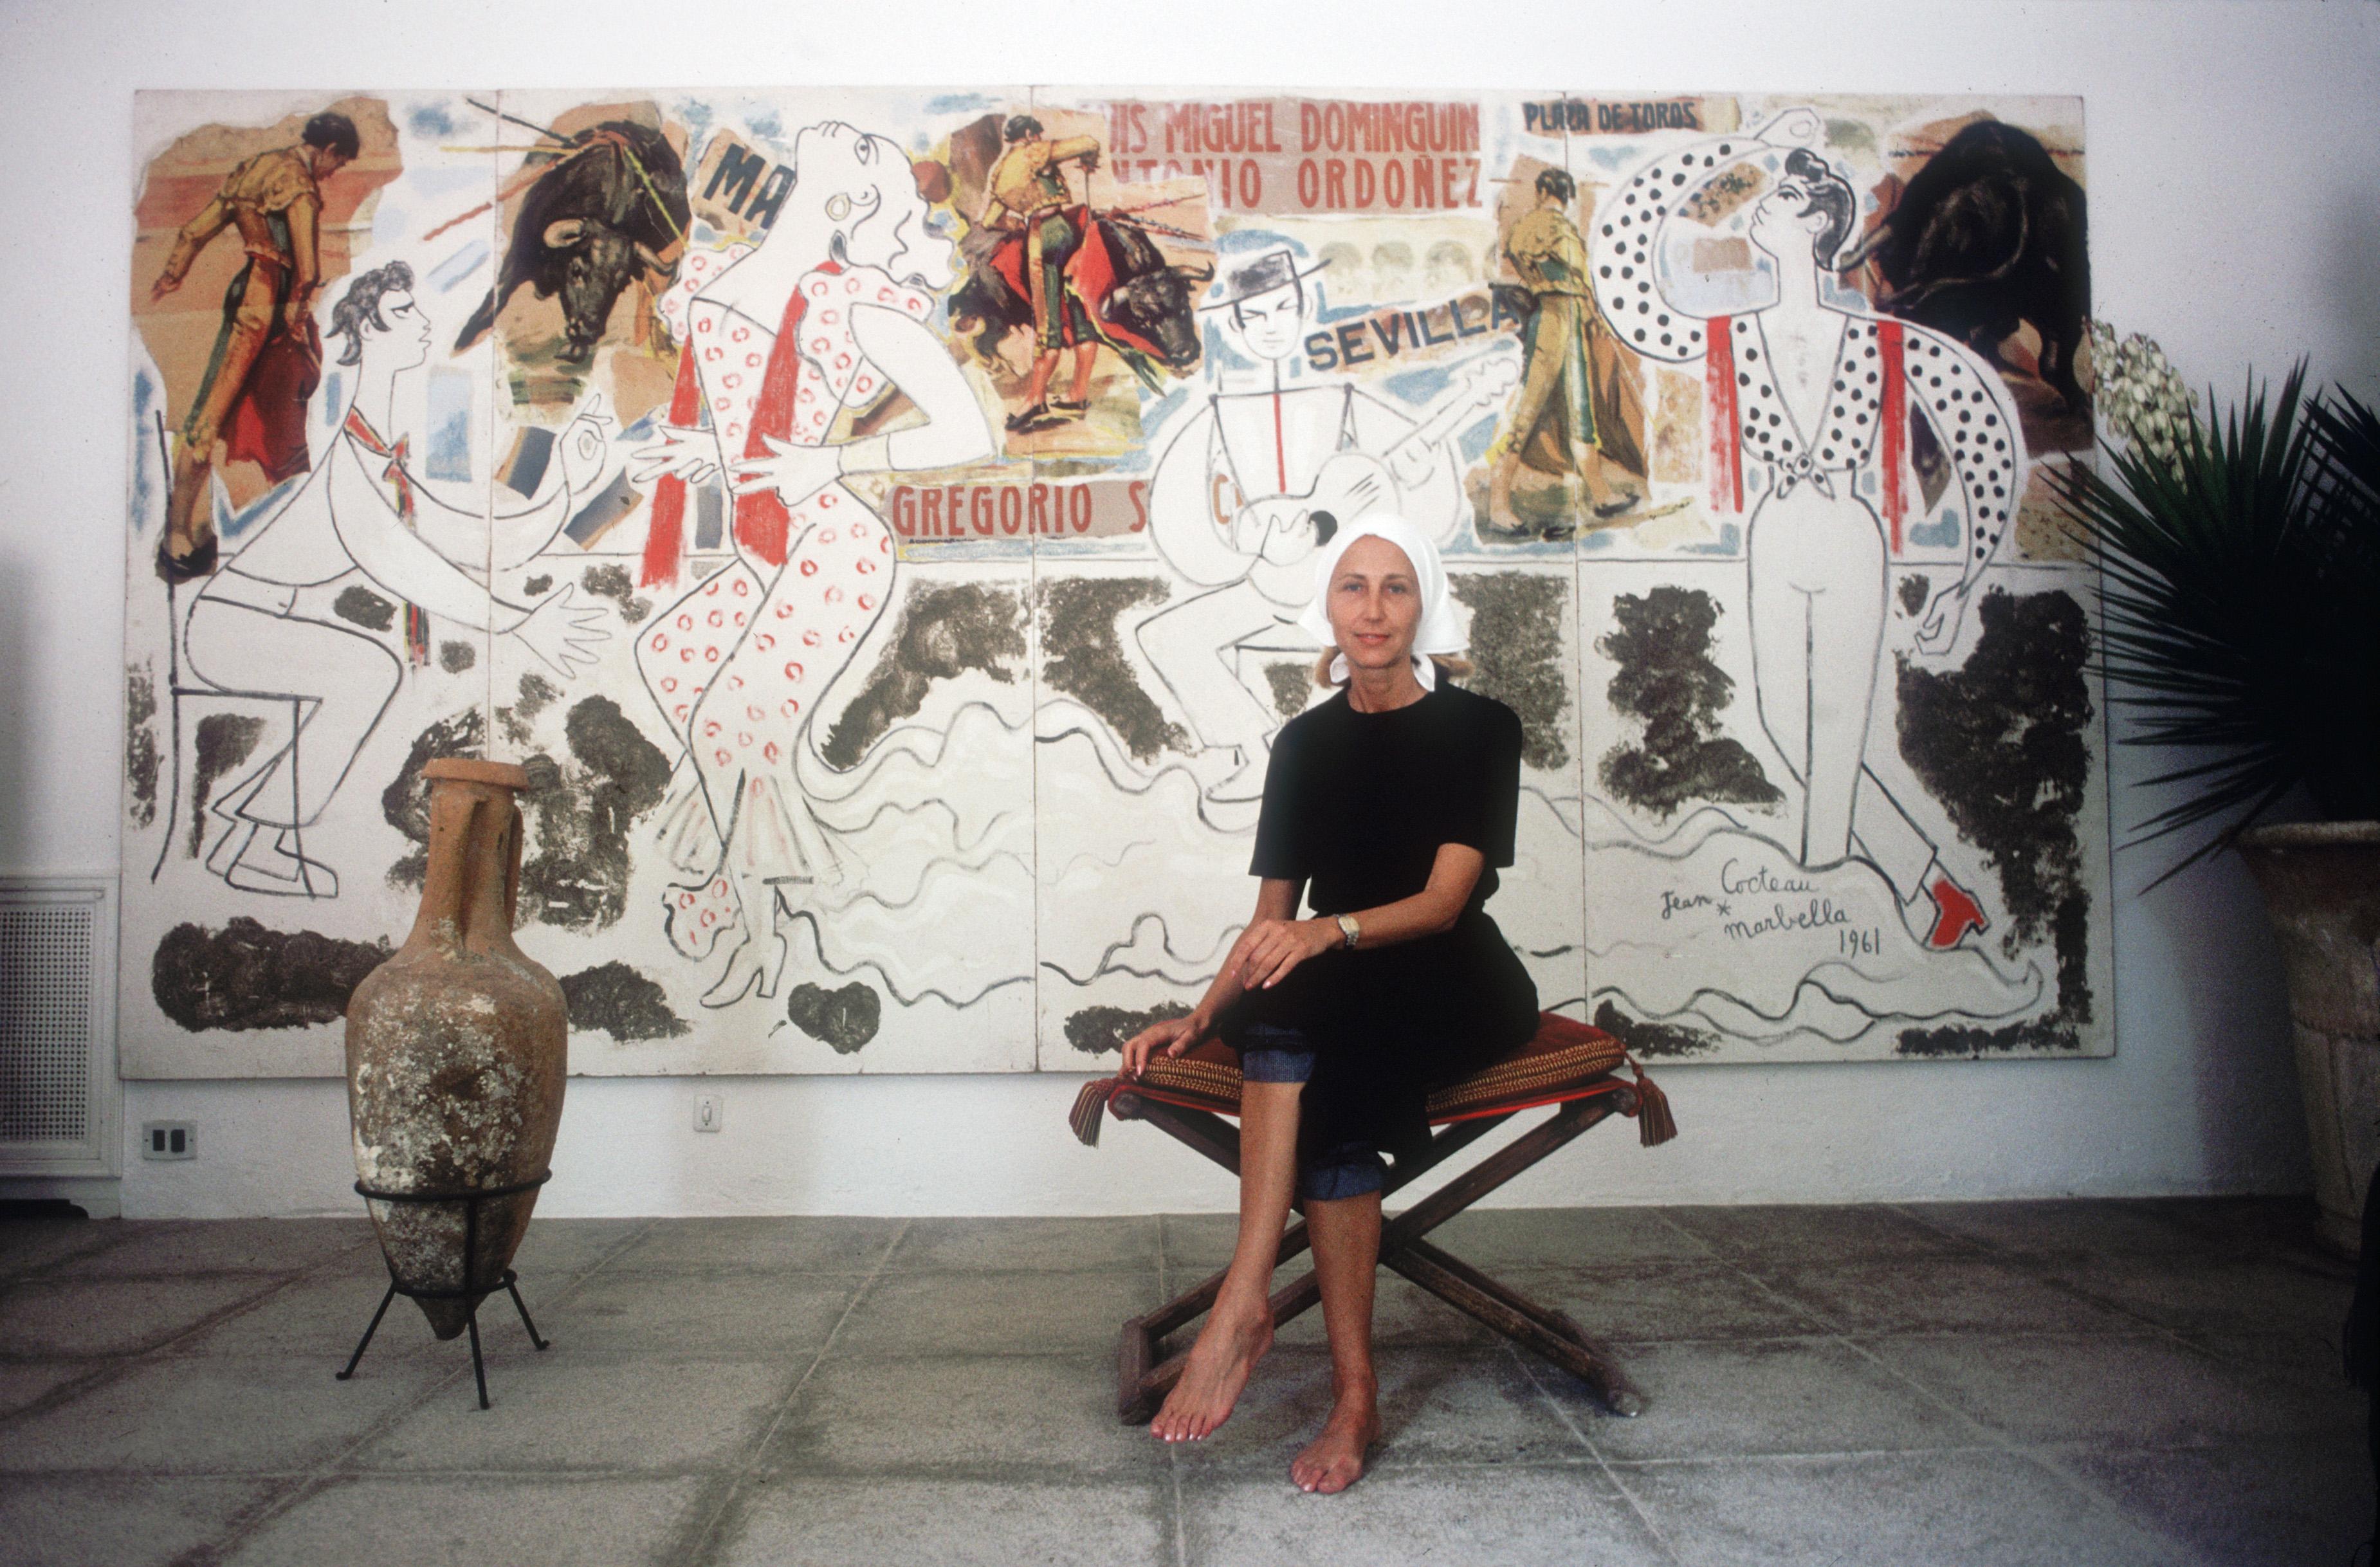 August 1982: Art collector Sylvia Coca sits in front of one of Jean Cocteau's murals in Marbella. (Photo by Slim Aarons/Getty Images)

Slim Aarons Estate Edition, Certificate of Authenticity included
Numbered and stamped by the Slim Aarons